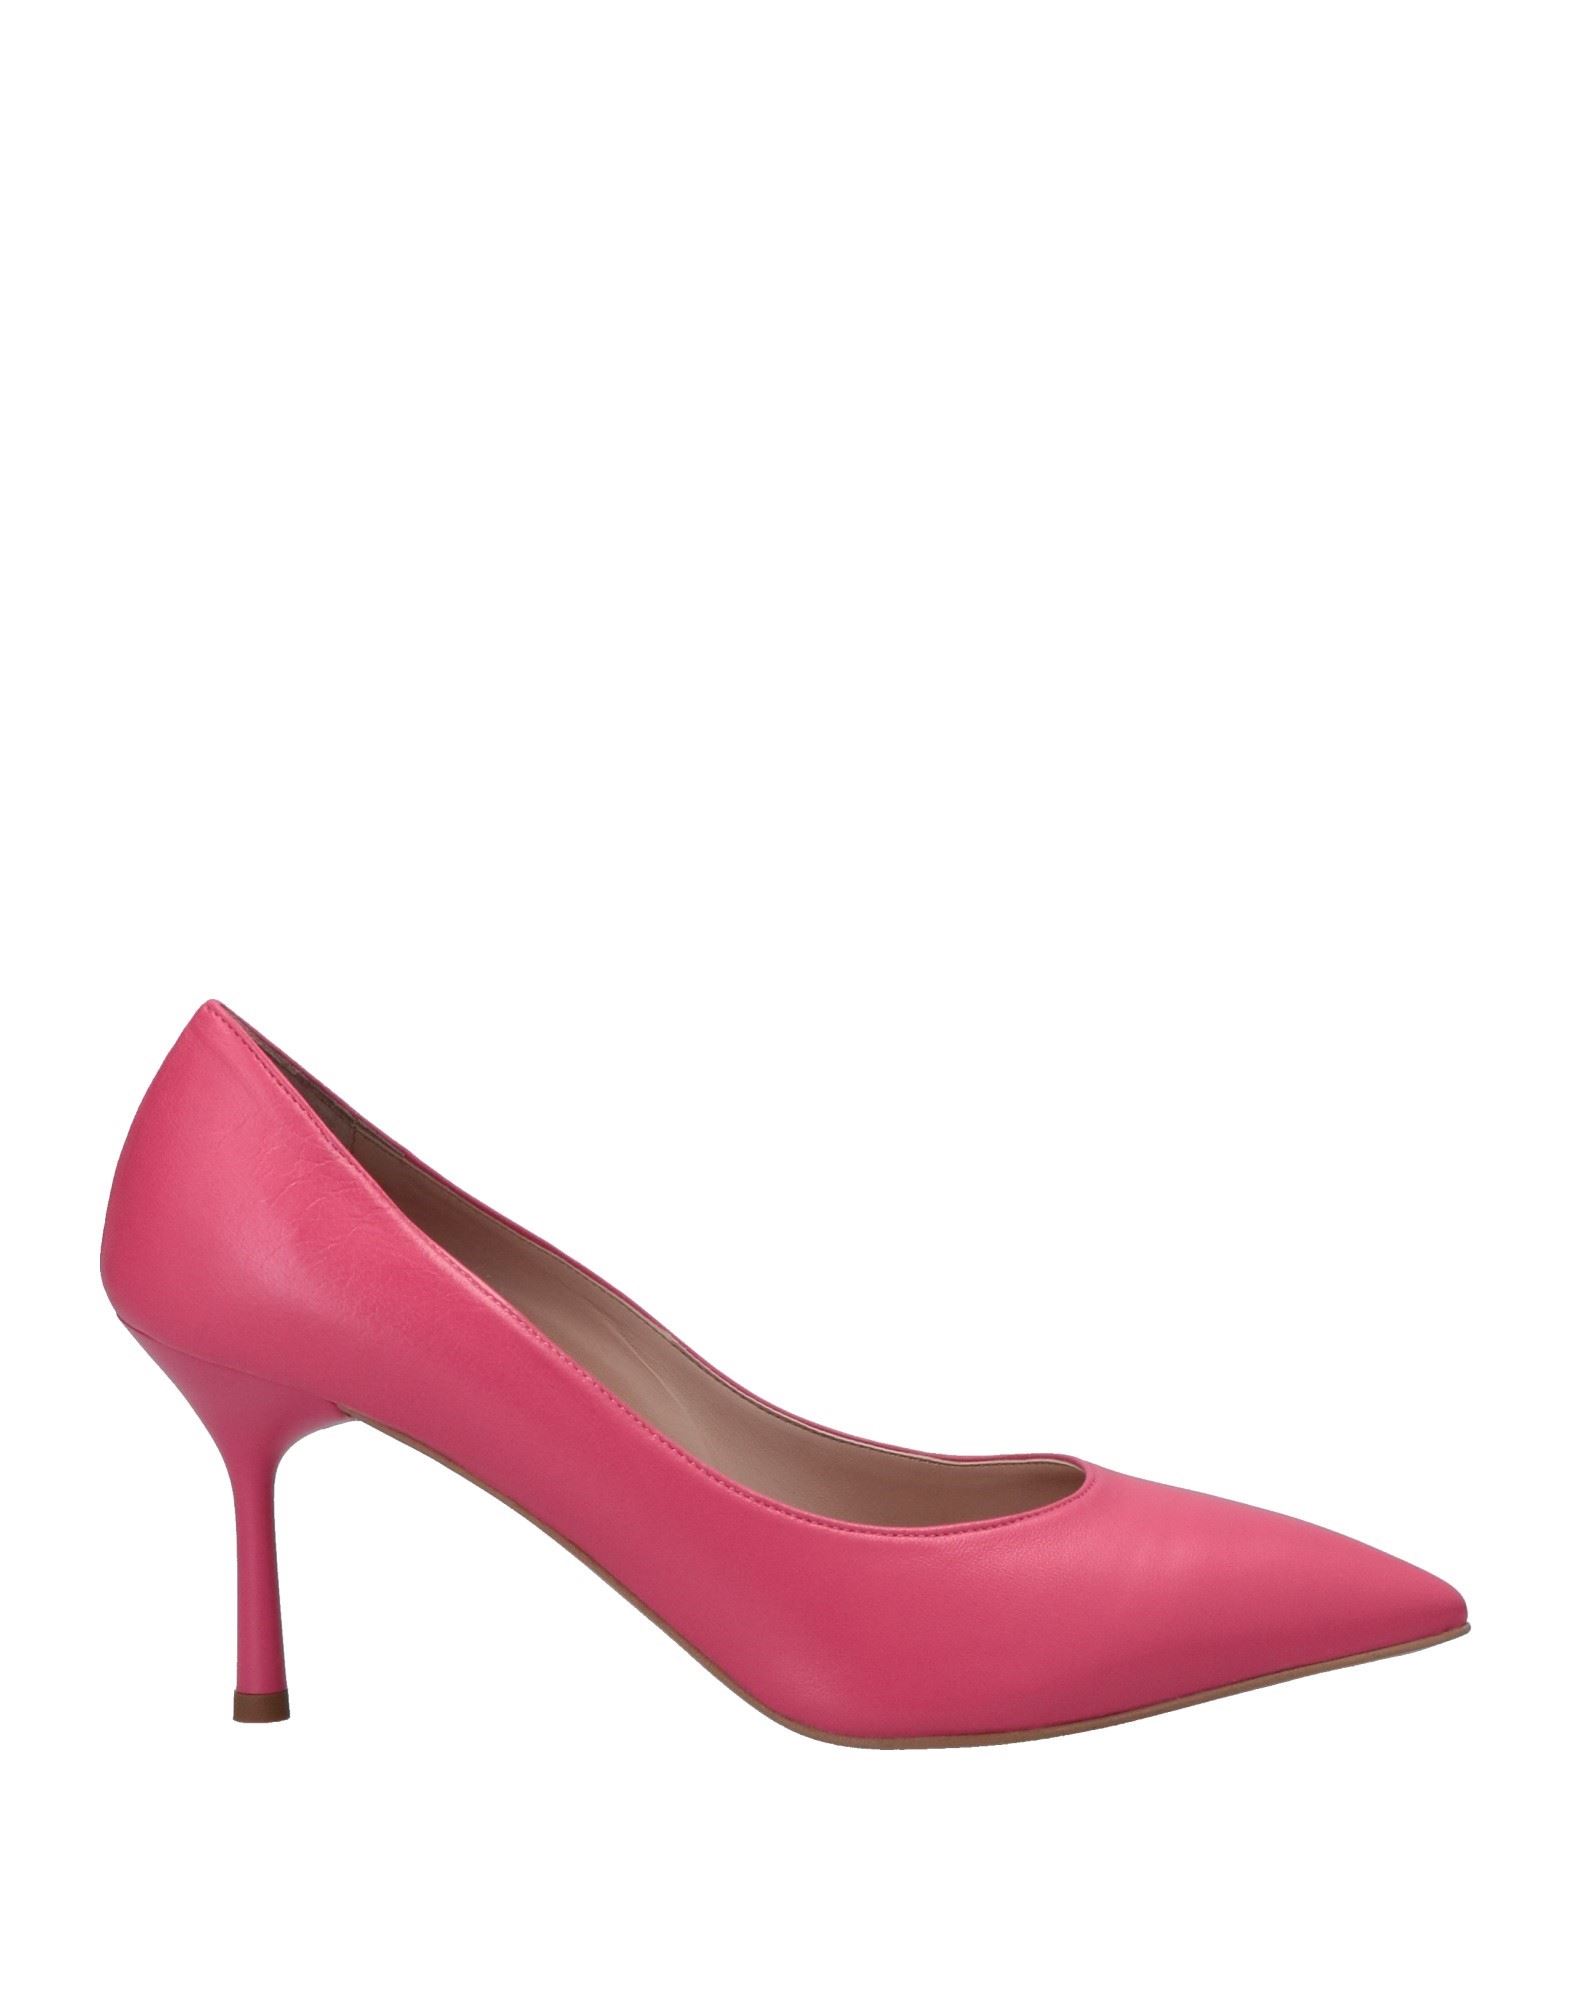 Shop Islo Isabella Lorusso Woman Pumps Magenta Size 8 Soft Leather